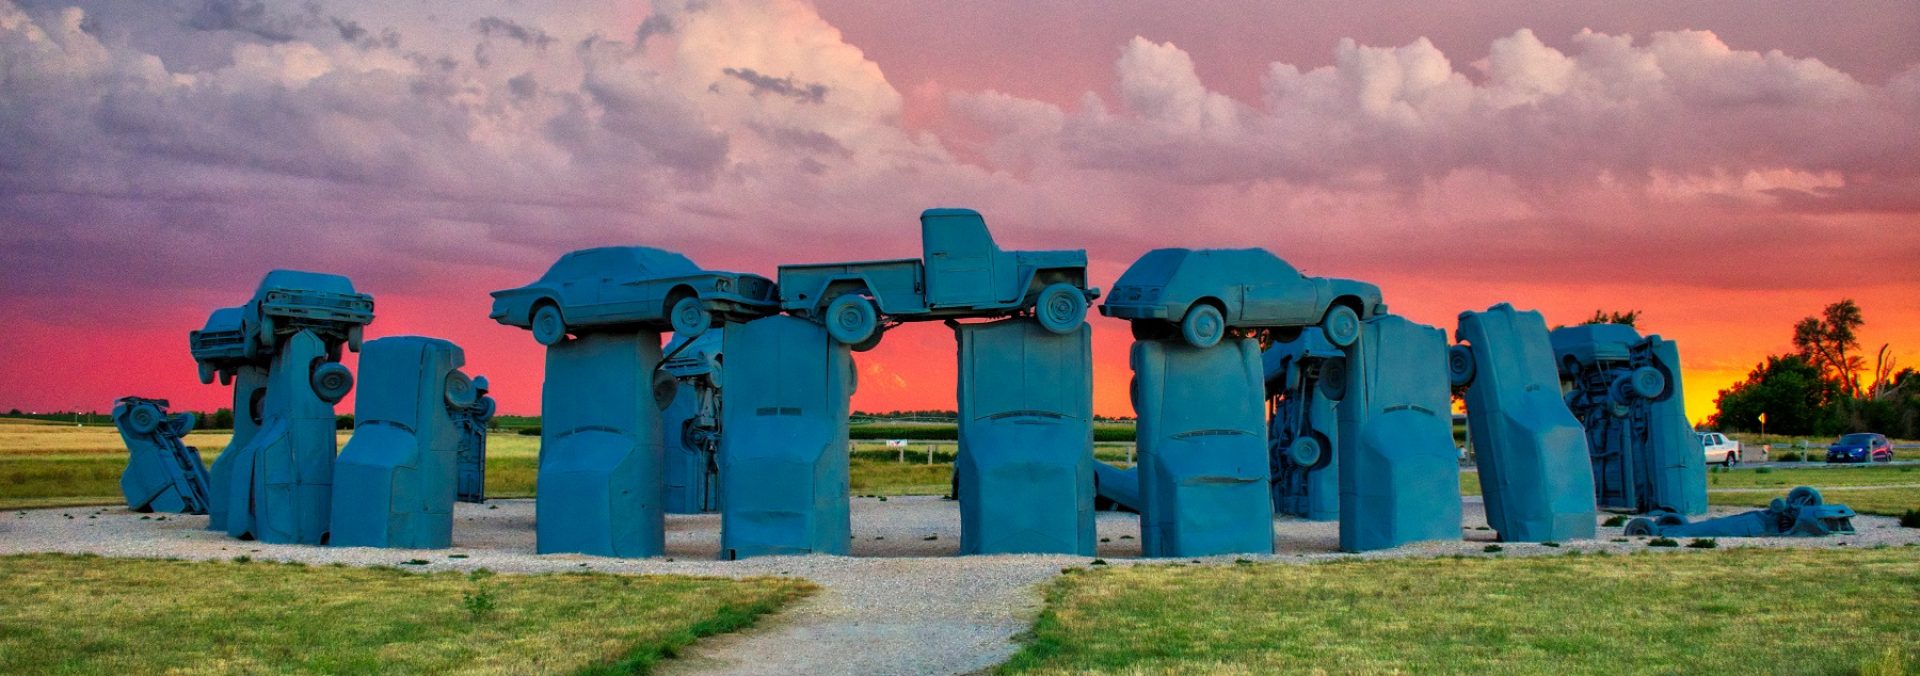 Carhenge with a beautiful sunset with orange, pink and purple sky.